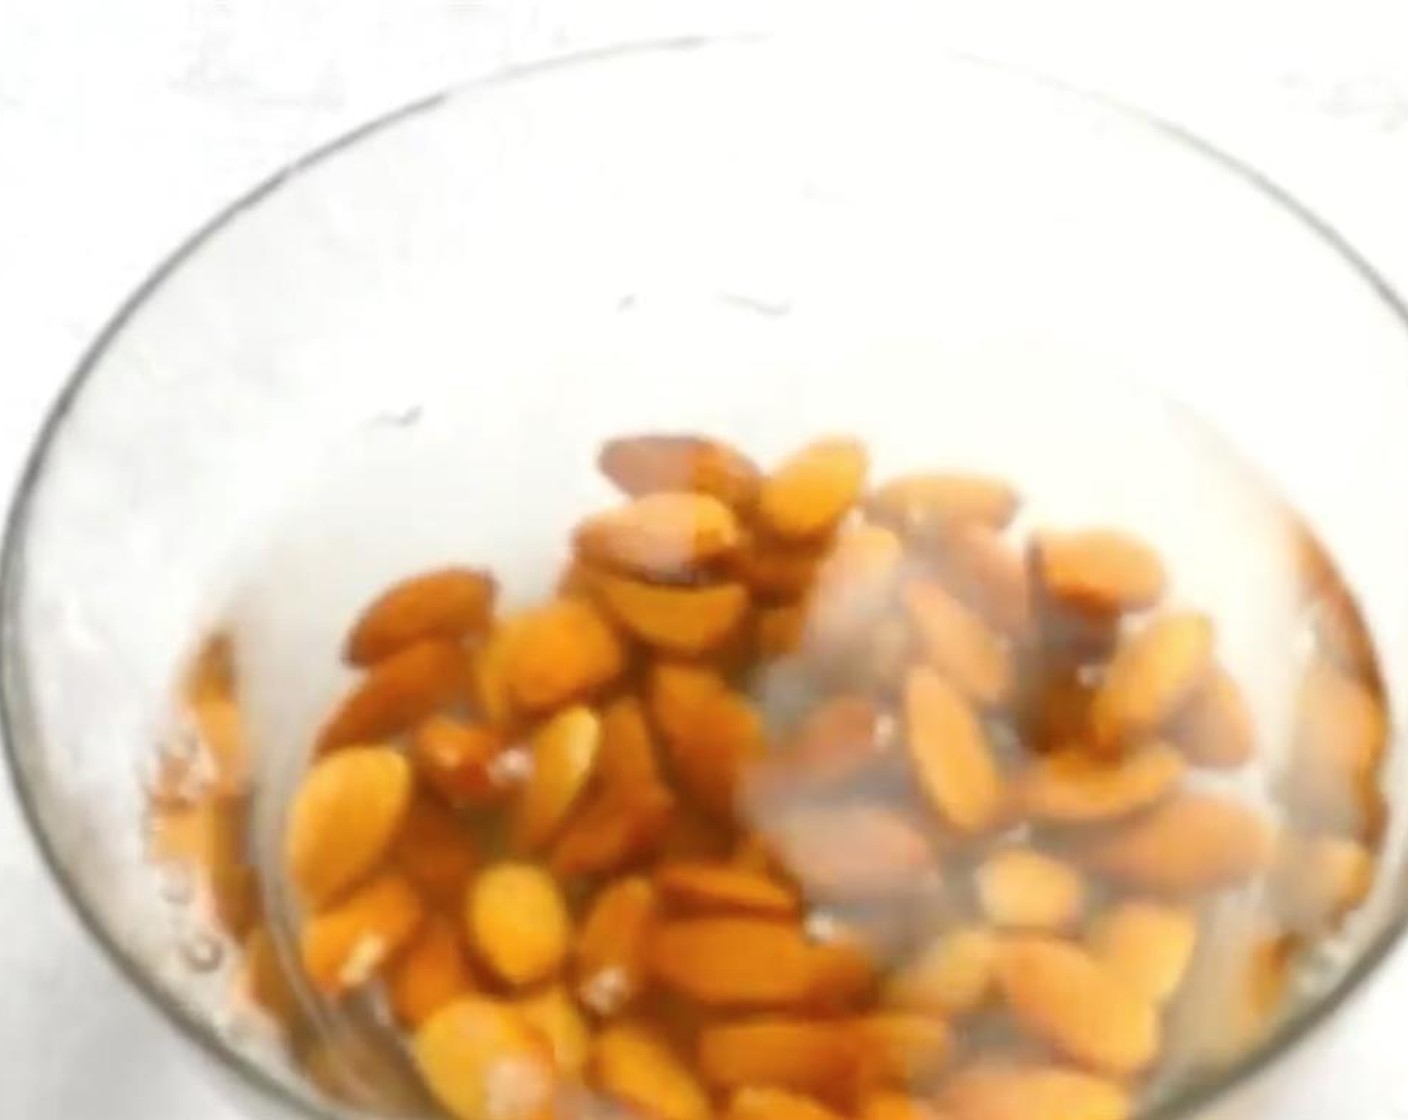 step 1 Boil the Almonds (1/2 cup) in water for 2 minutes.